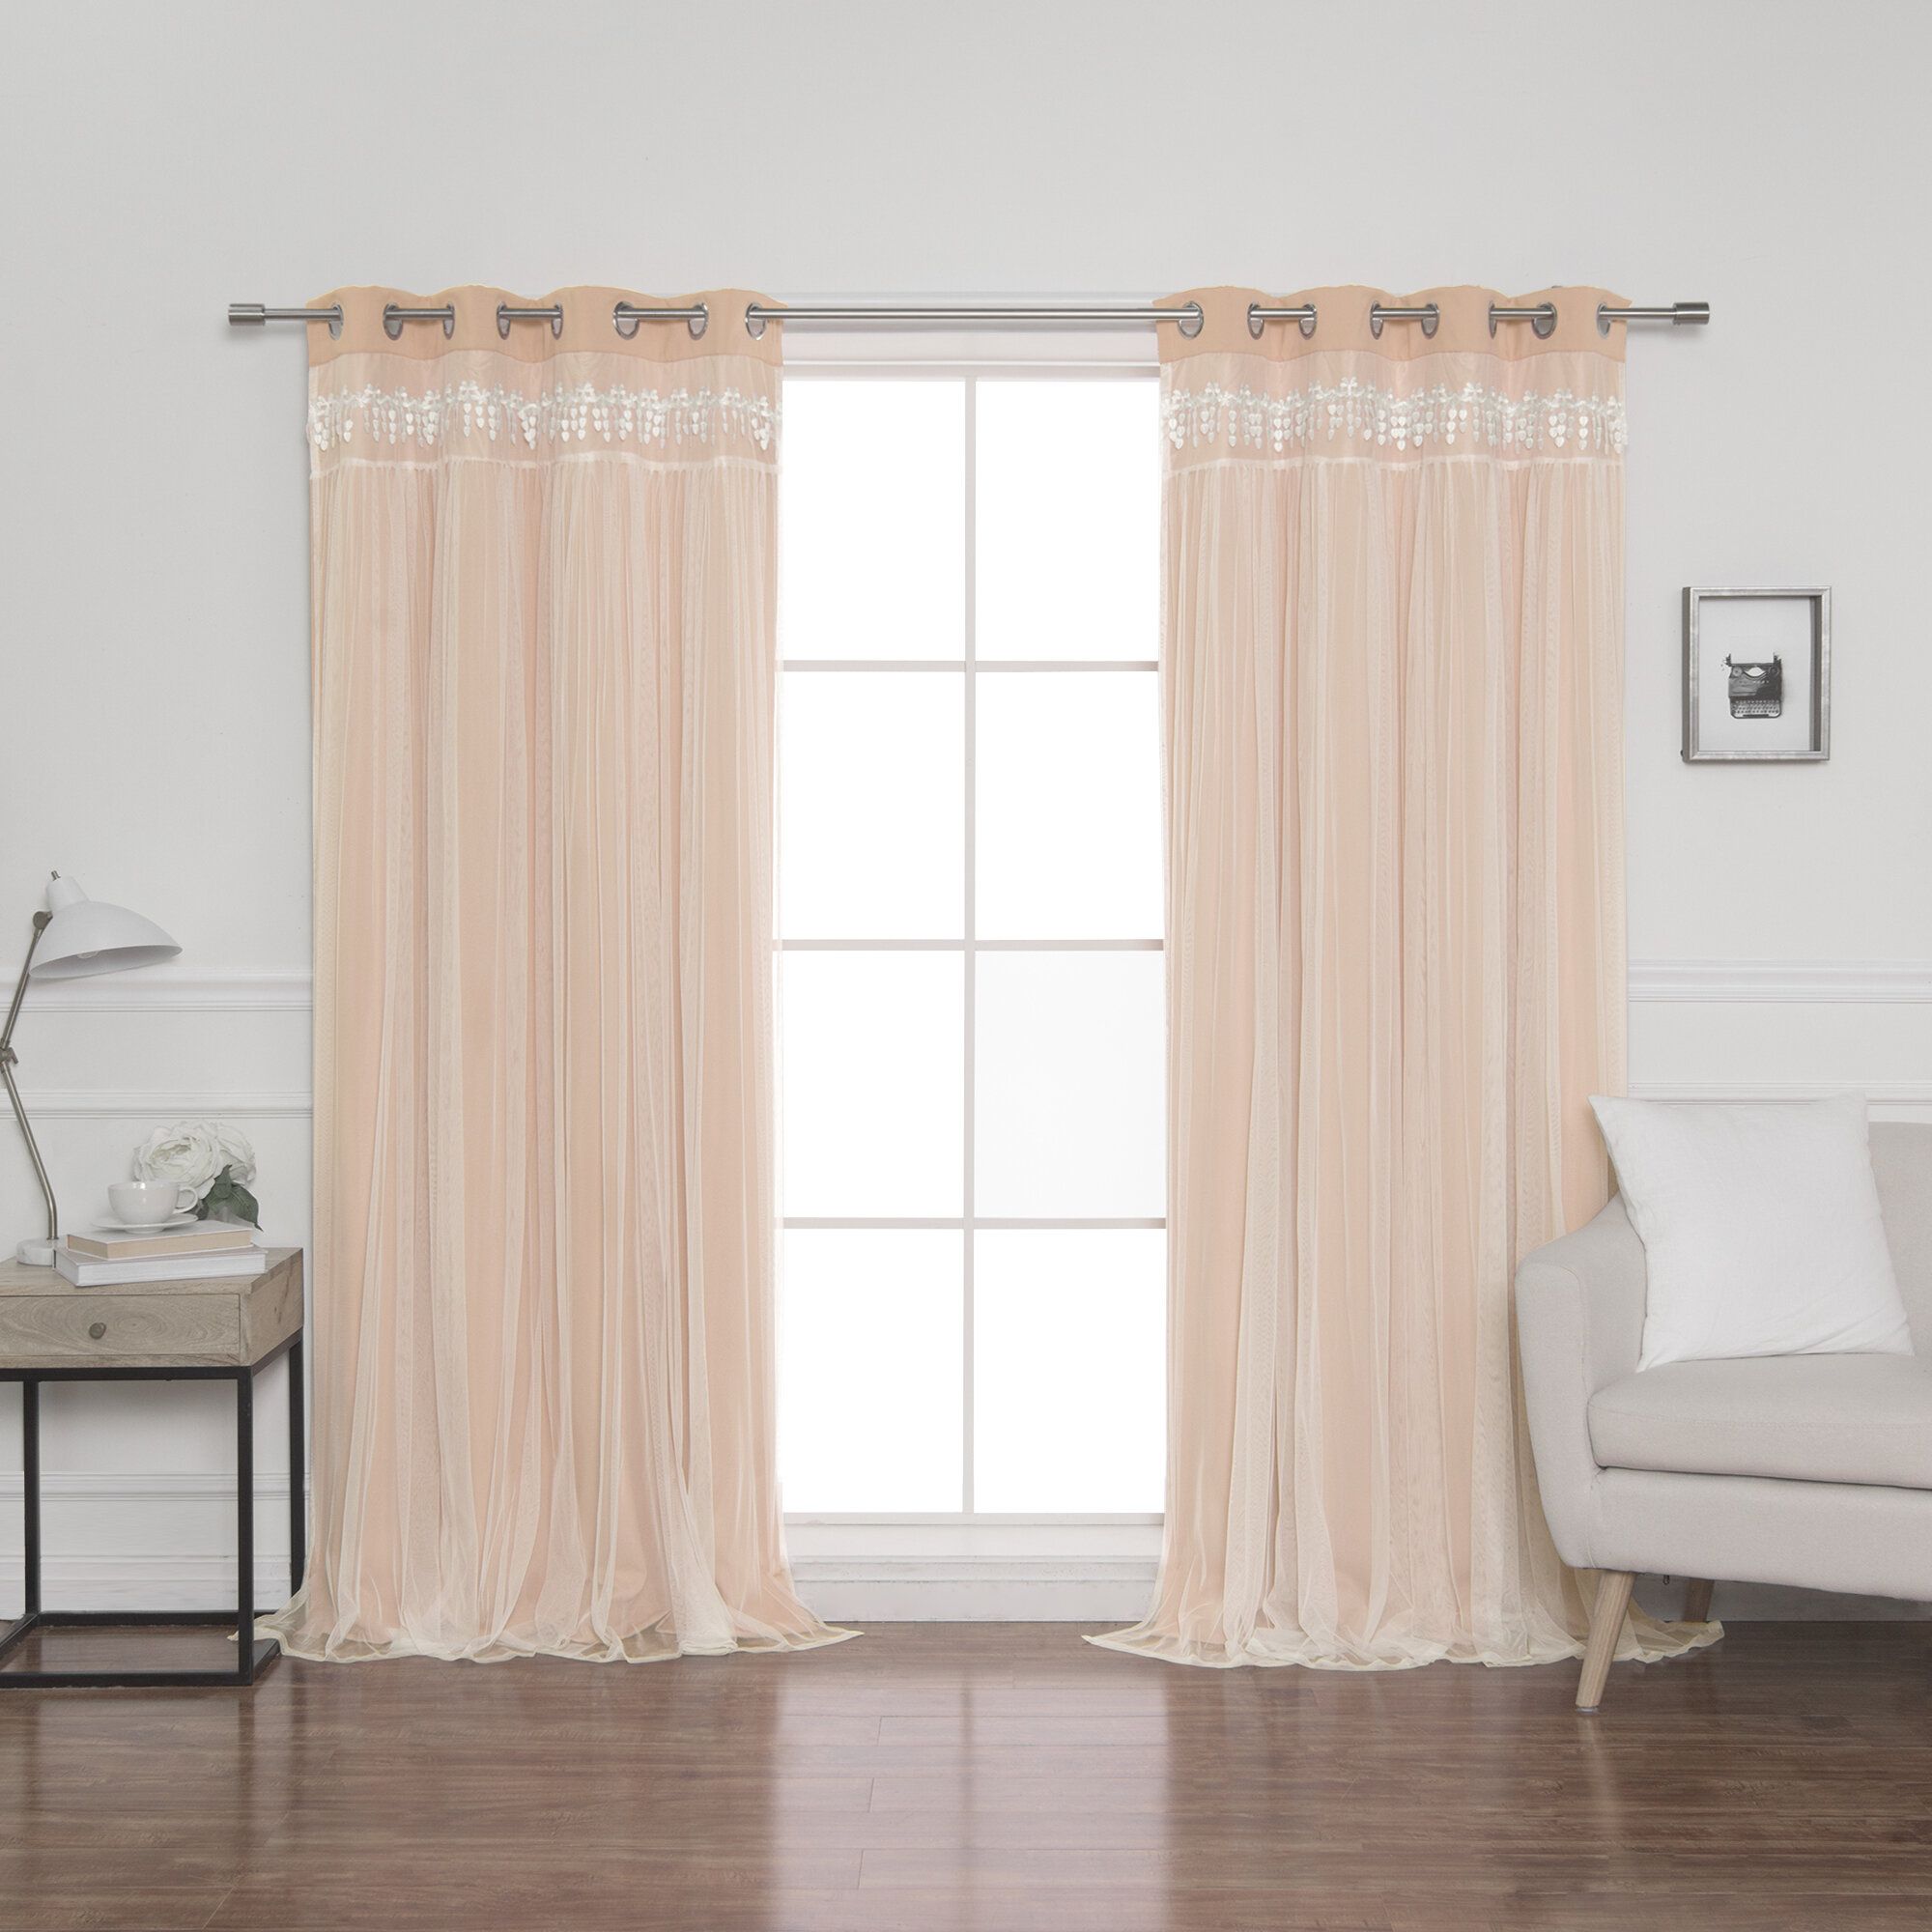 Loar Solid Blackout Thermal Grommet Curtain Panels Inside Solid Insulated Thermal Blackout Long Length Curtain Panel Pairs (View 20 of 30)